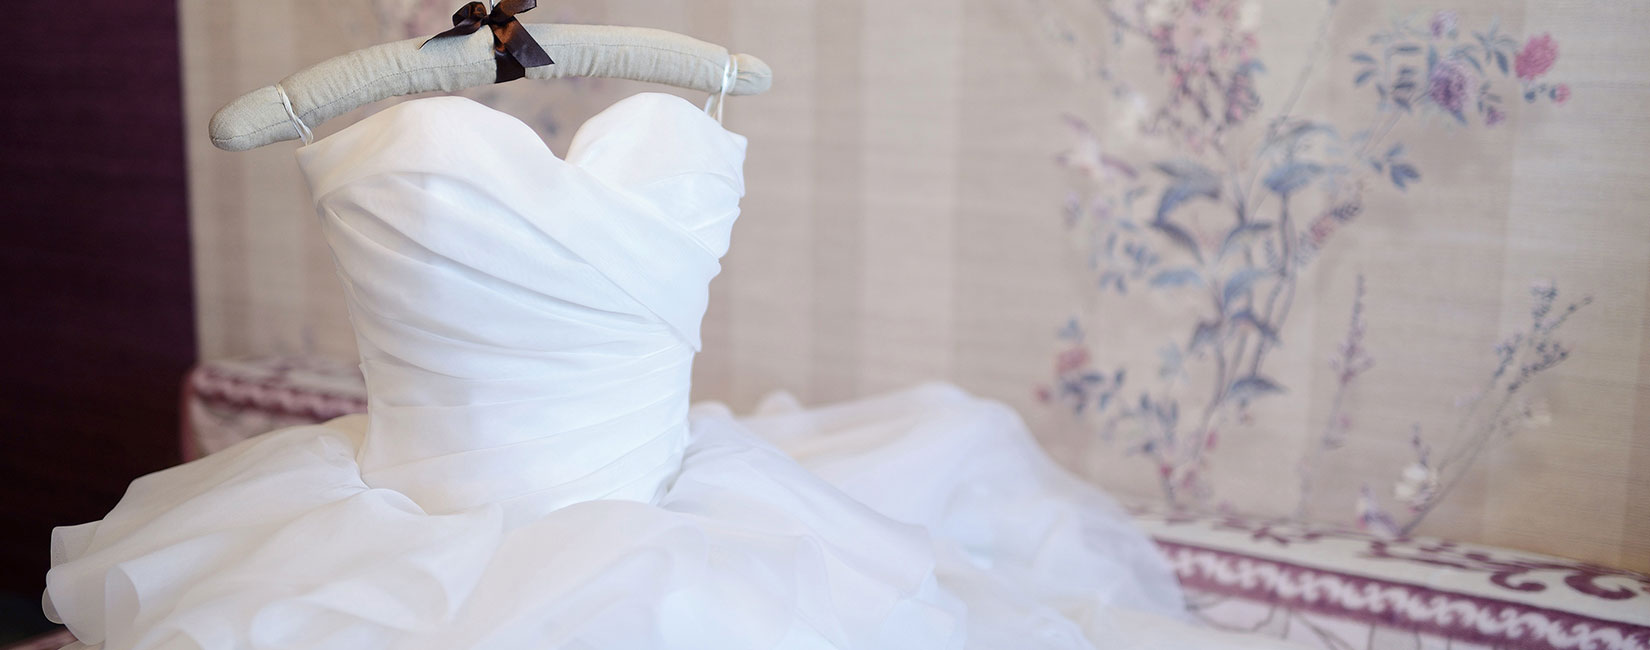 Wedding gown dry cleaning